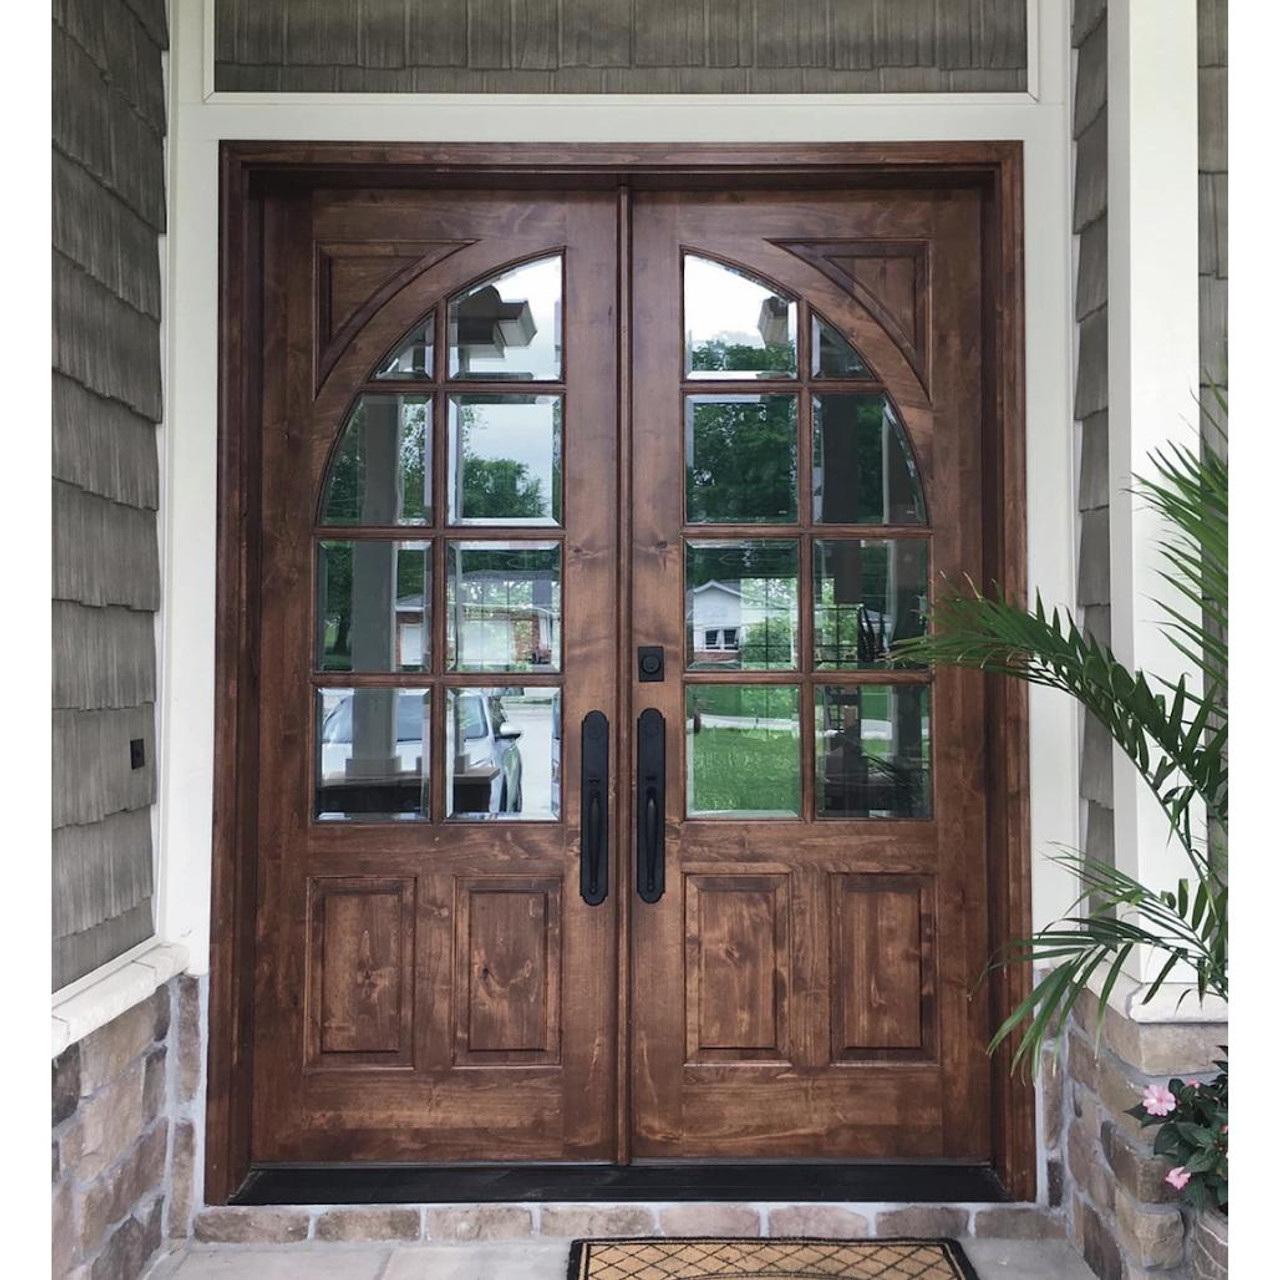 How to choose a double front door - recommendations for choosing